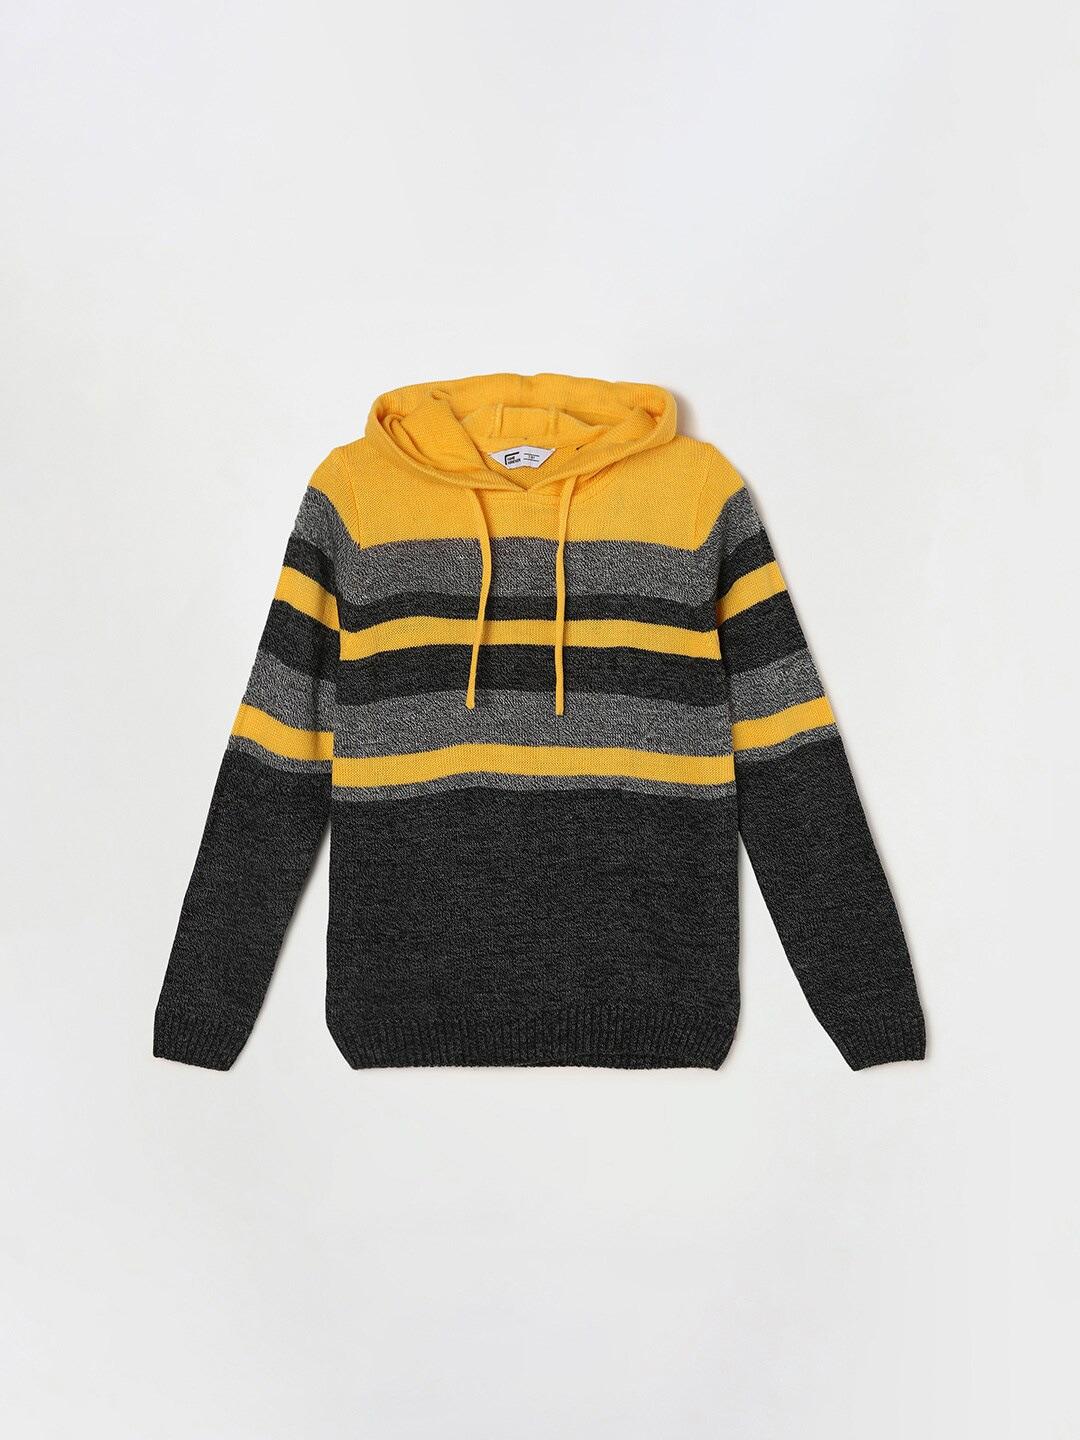 Fame Forever by Lifestyle Boys Black & Yellow Striped Acrylic Hooded Pullover Sweater